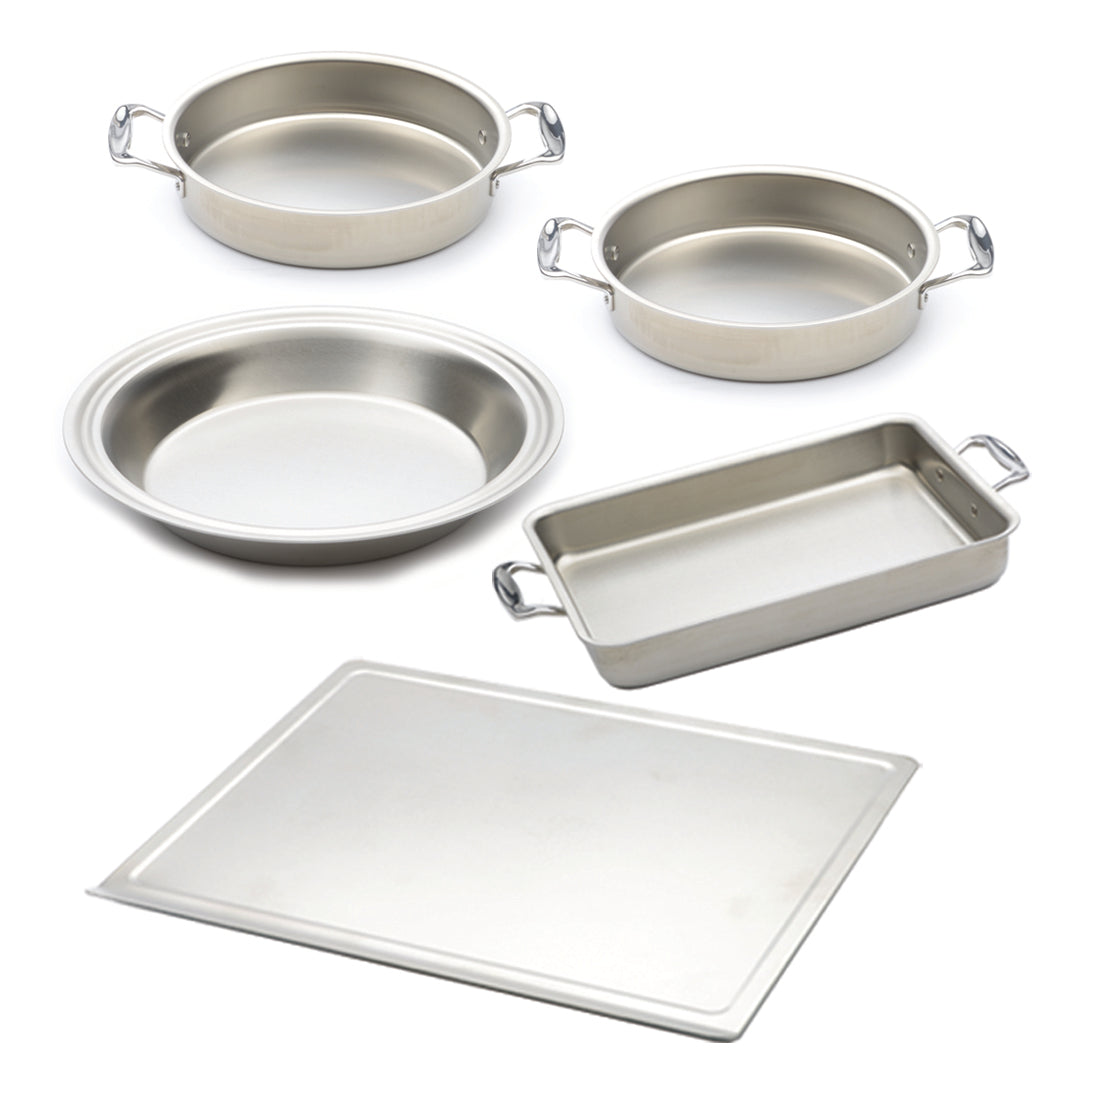 5-Ply Bakeware, is it Worth it? - Sizzle and Sear